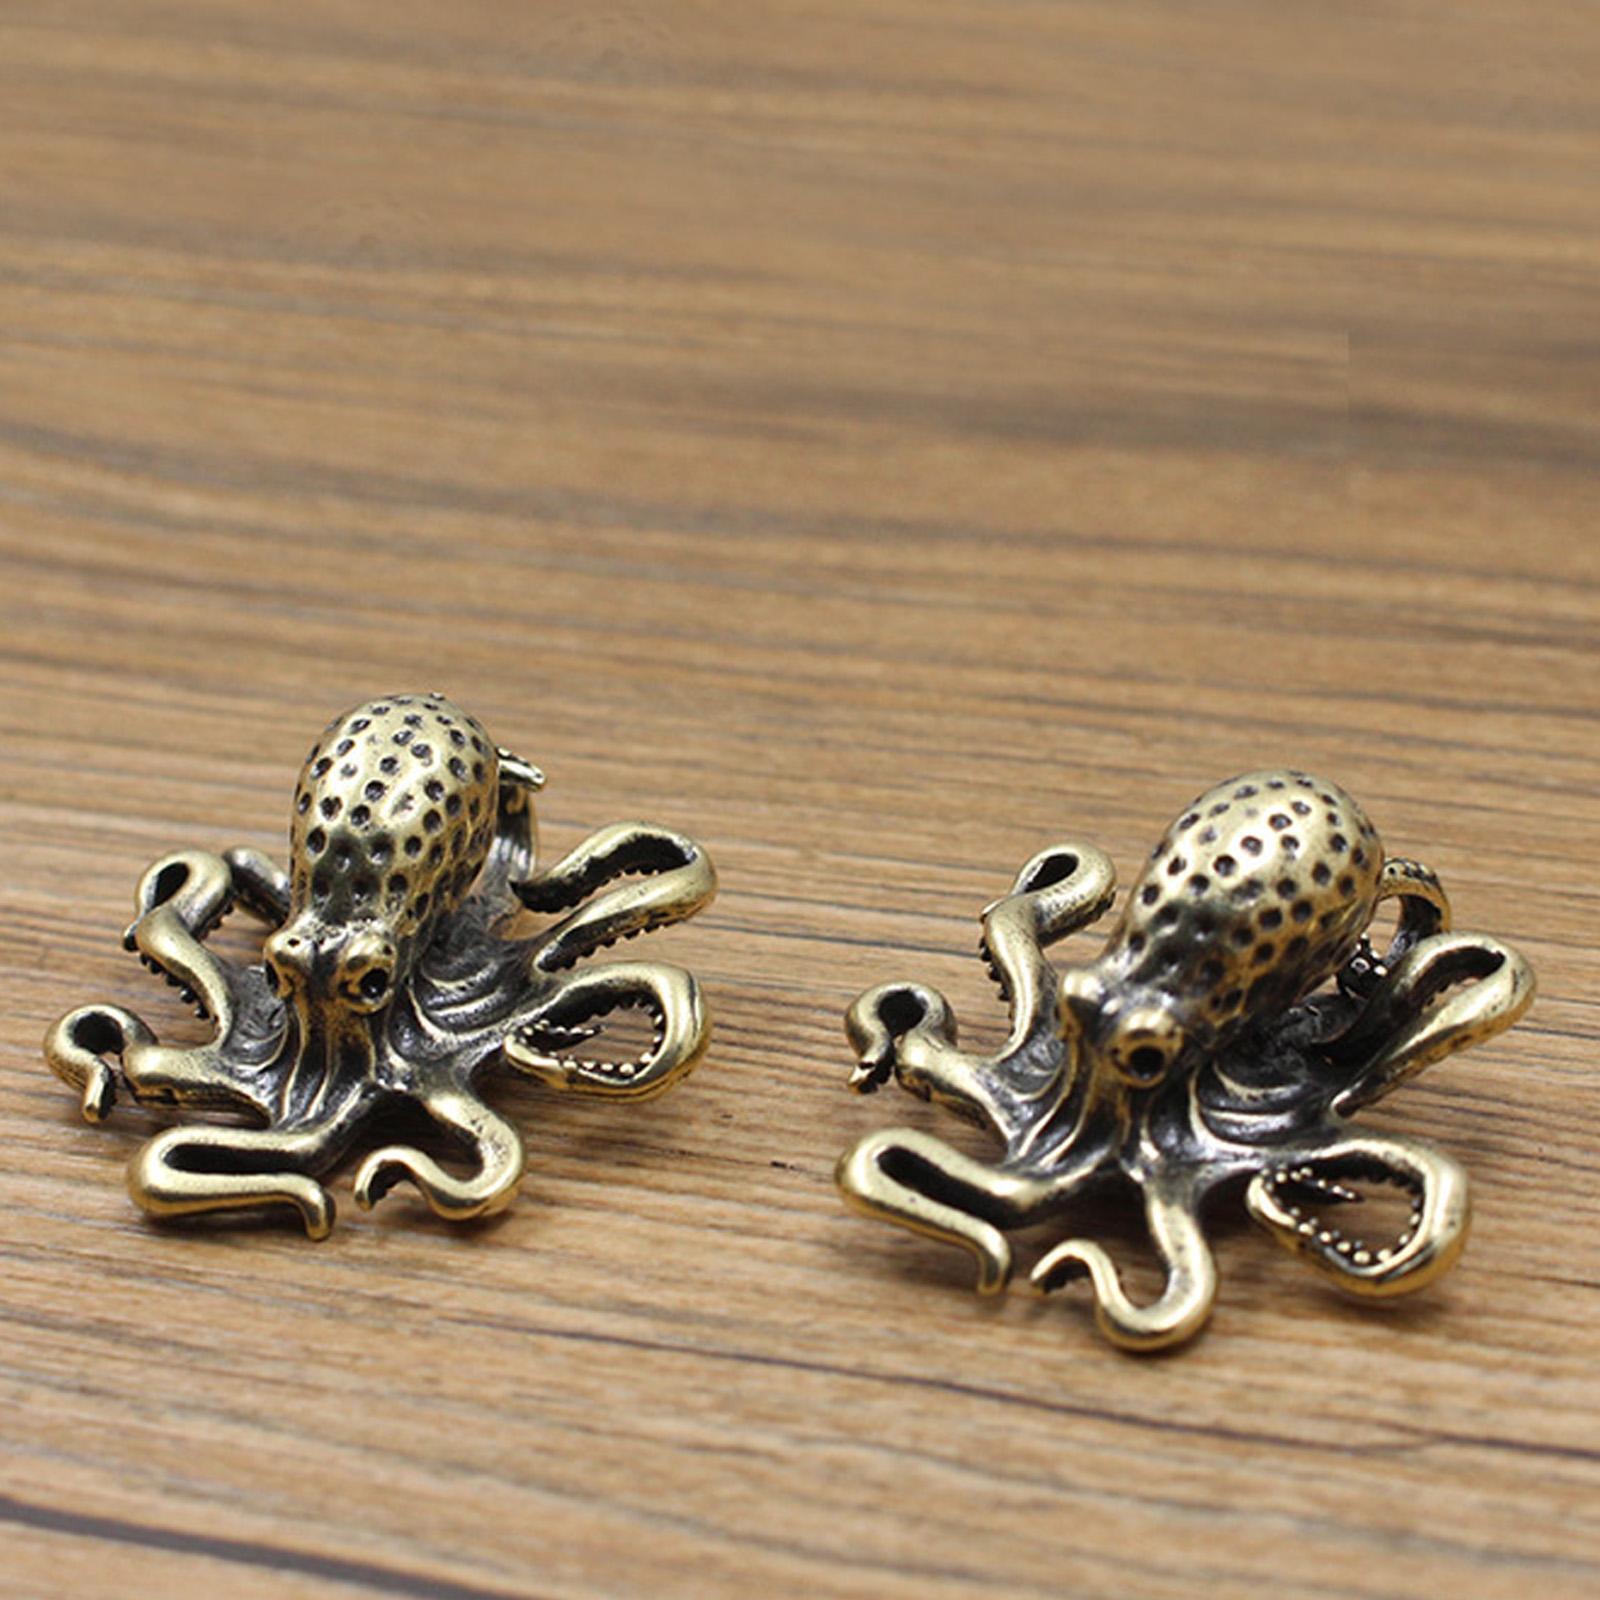 Brass Octopus Figurines Small Statue Home Ornaments Gift Animal